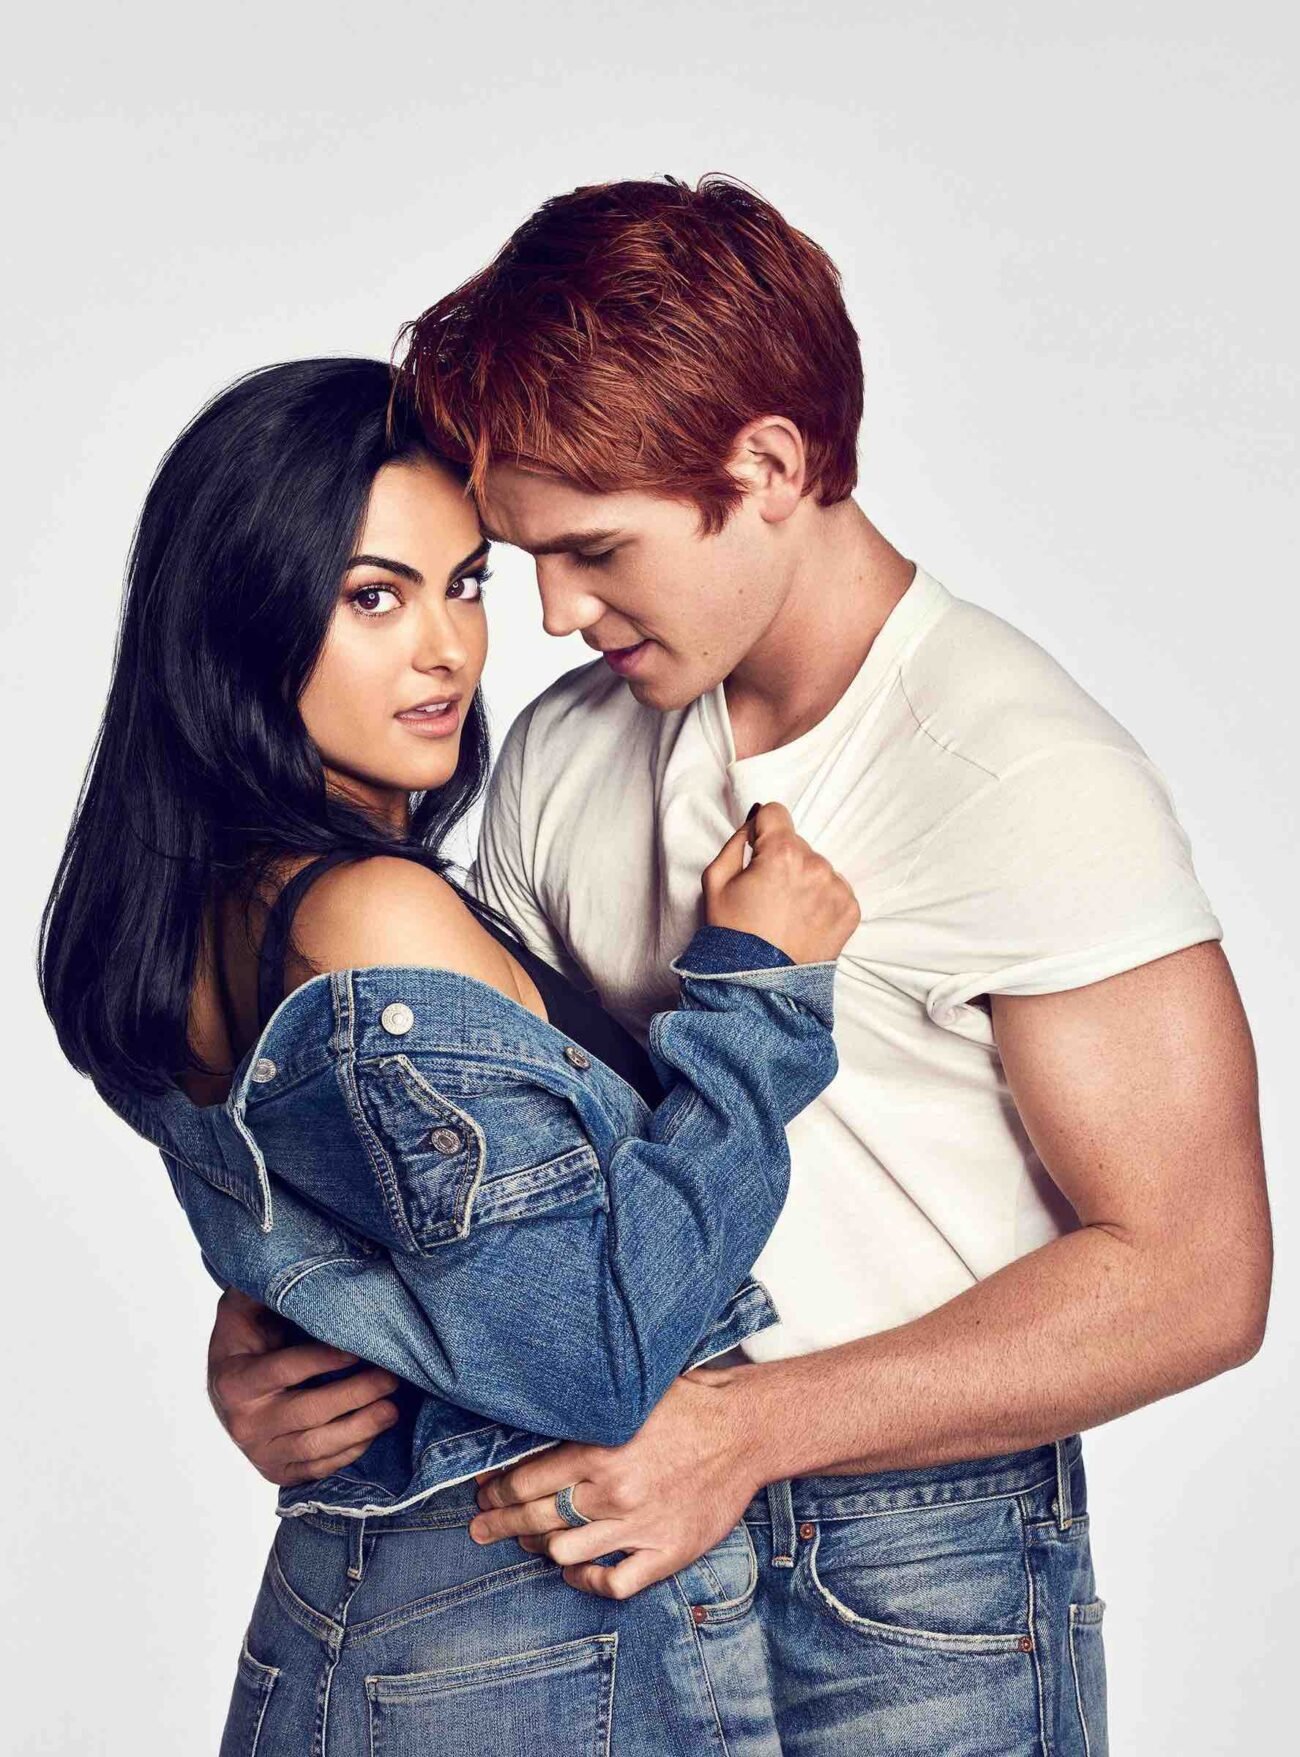 We’re thinking that we see an endgame in the future for Archie (KJ Apa) and Veronica (Camila Mendes) on 'Riverdale'. Here’s why.